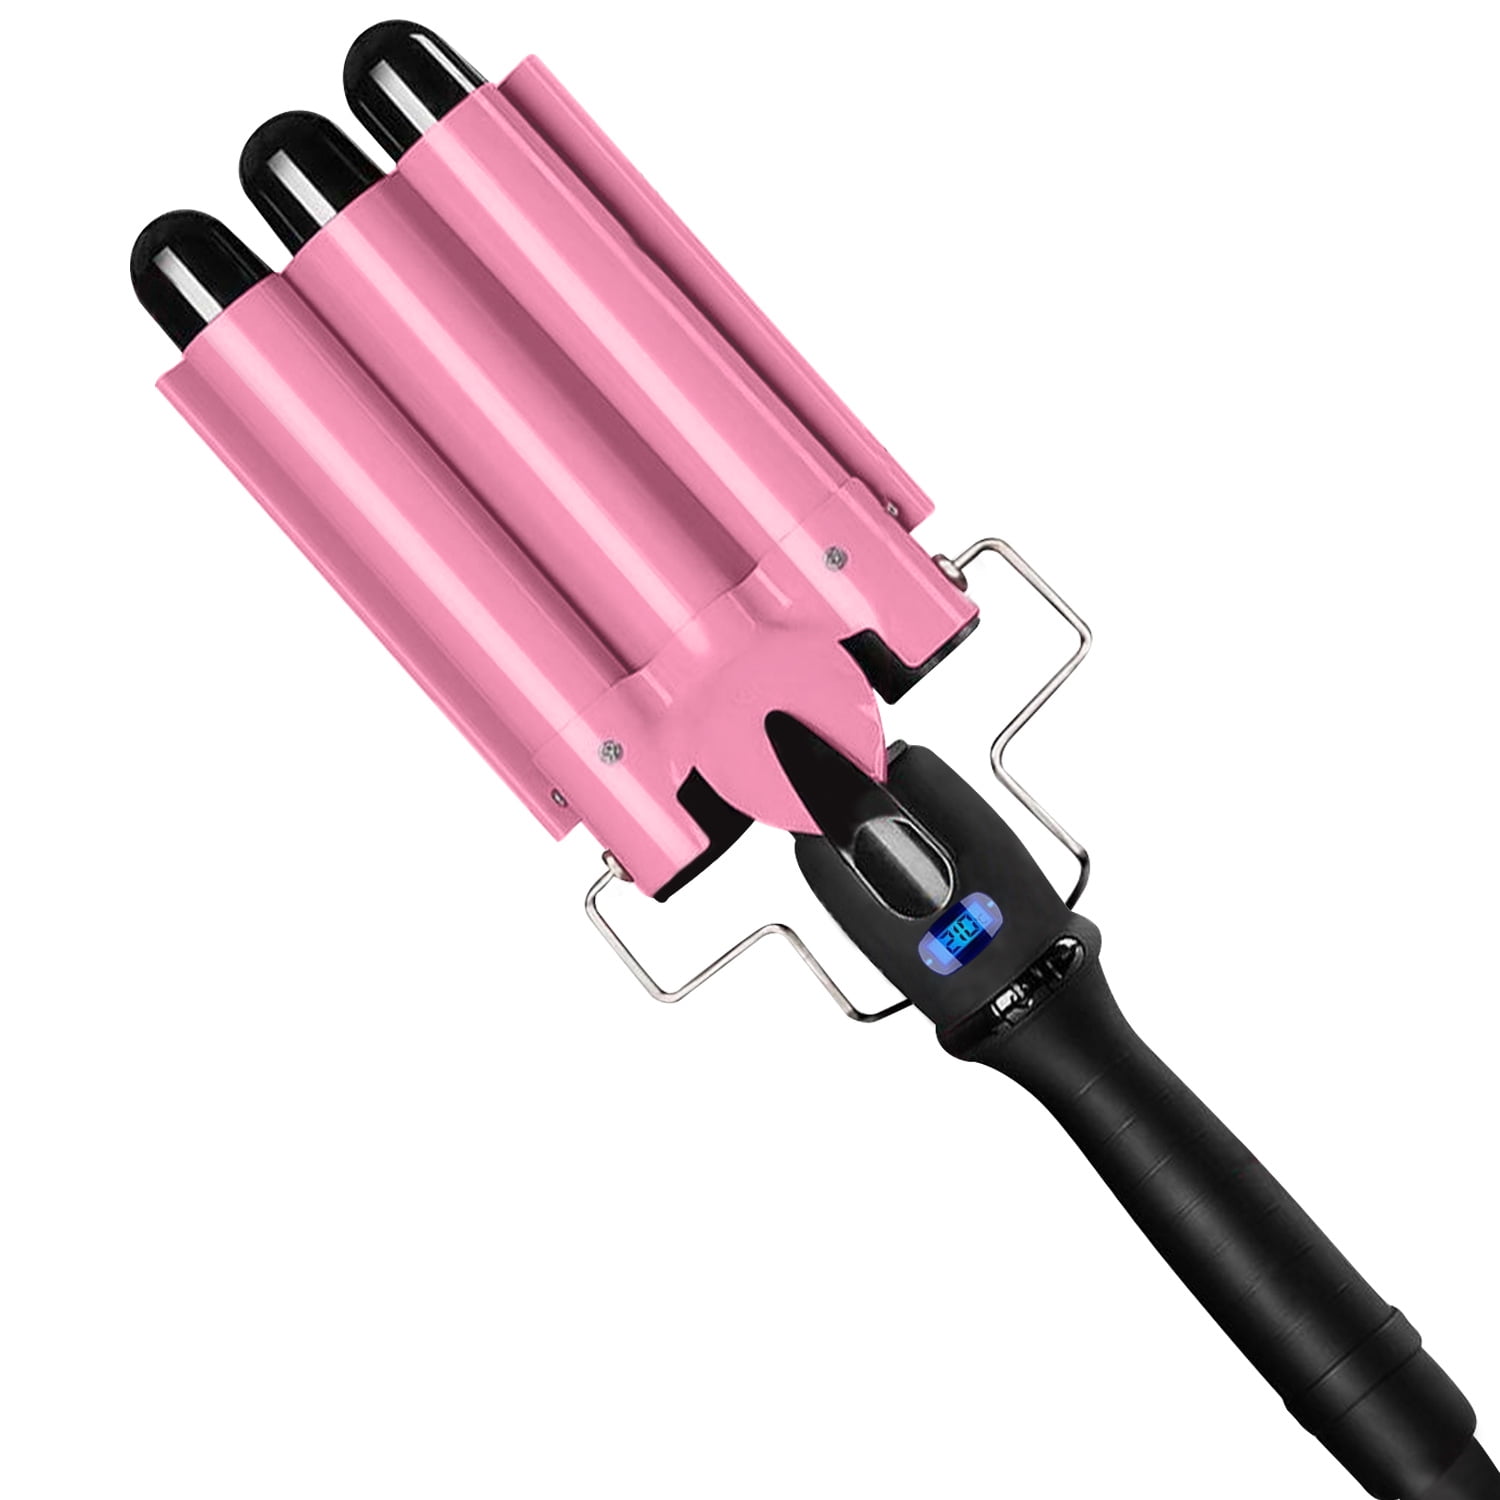 MHU Professional Flat Iron 3 in 1 Hair Crimper Hair Waver and Hair  Straightener, Curling Iron with 3 Interchangeable Ceramic Plates Hair  Styling Irons Adjustable Temp Auto Shut-off : Amazon.com.au: Beauty